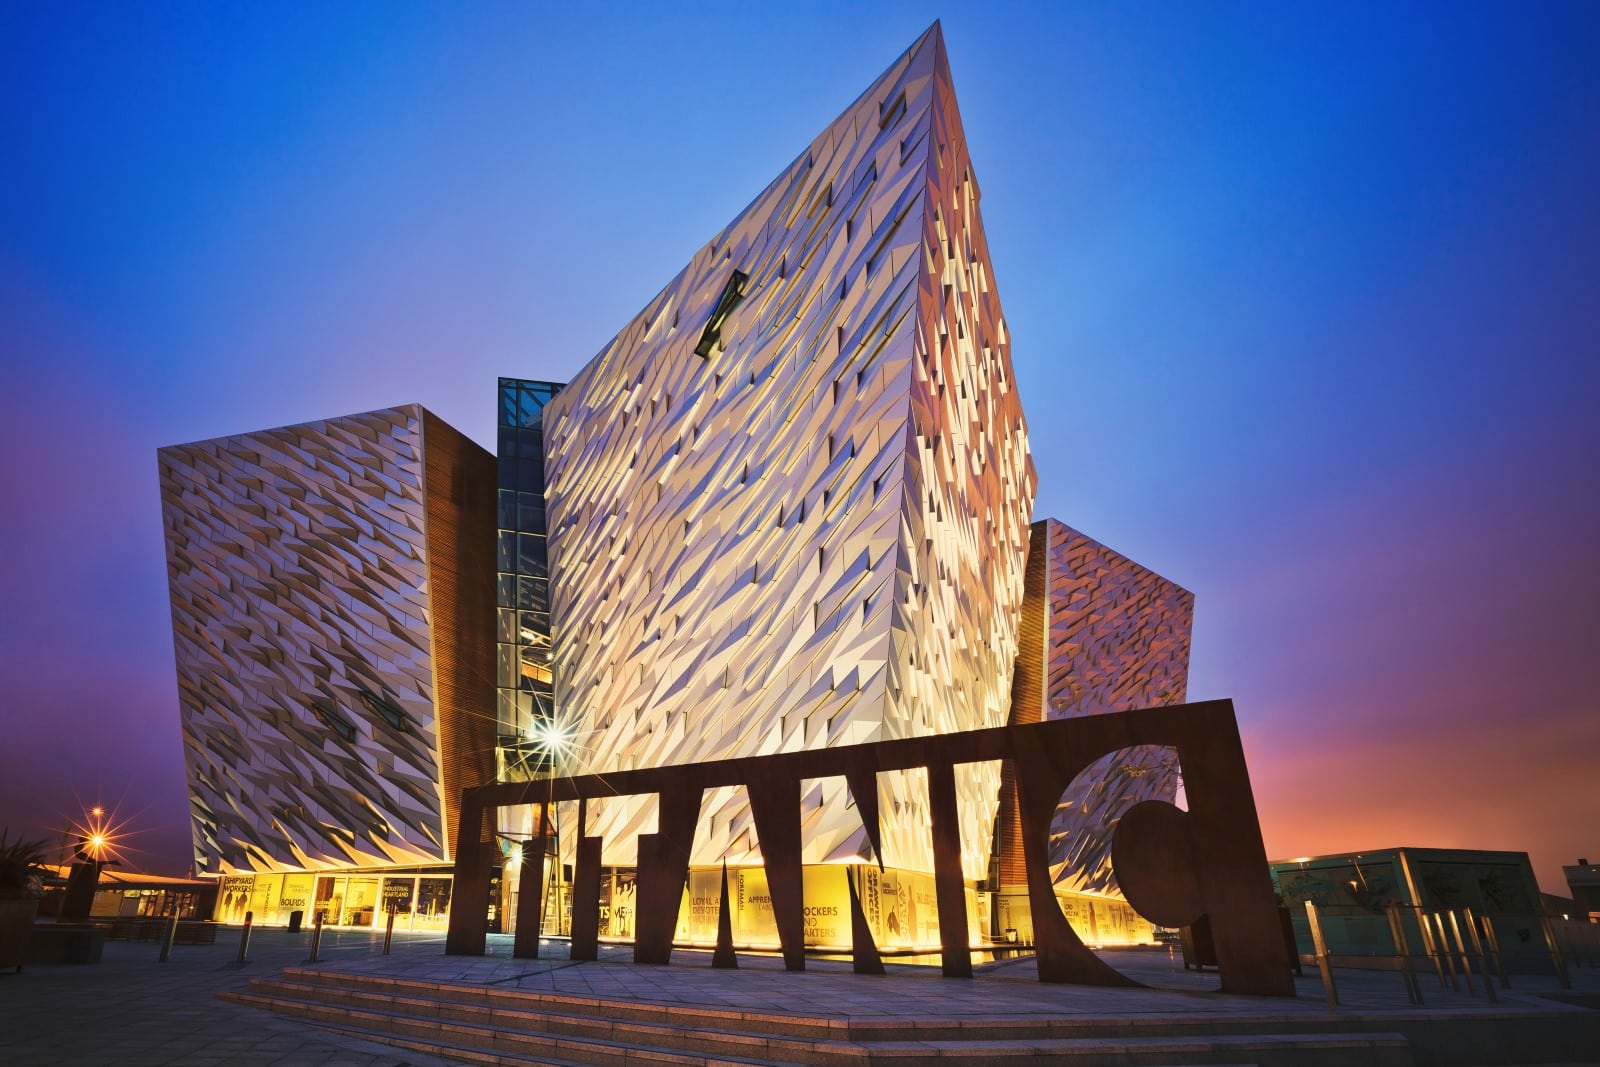 <p><span>The capital of Northern Ireland, Belfast, has emerged from its turbulent past into a city of hope and renewal. The Titanic Belfast museum stands as a symbol of the city’s shipbuilding legacy, while the political murals and the Crumlin Road Gaol offer insights into its more recent history.</span></p> <p><span>Belfast’s transformation is evident in its vibrant cultural scene, with various dining, shopping, and entertainment options. This city is a story of resilience, where history is remembered and the future is embraced with optimism.</span></p>